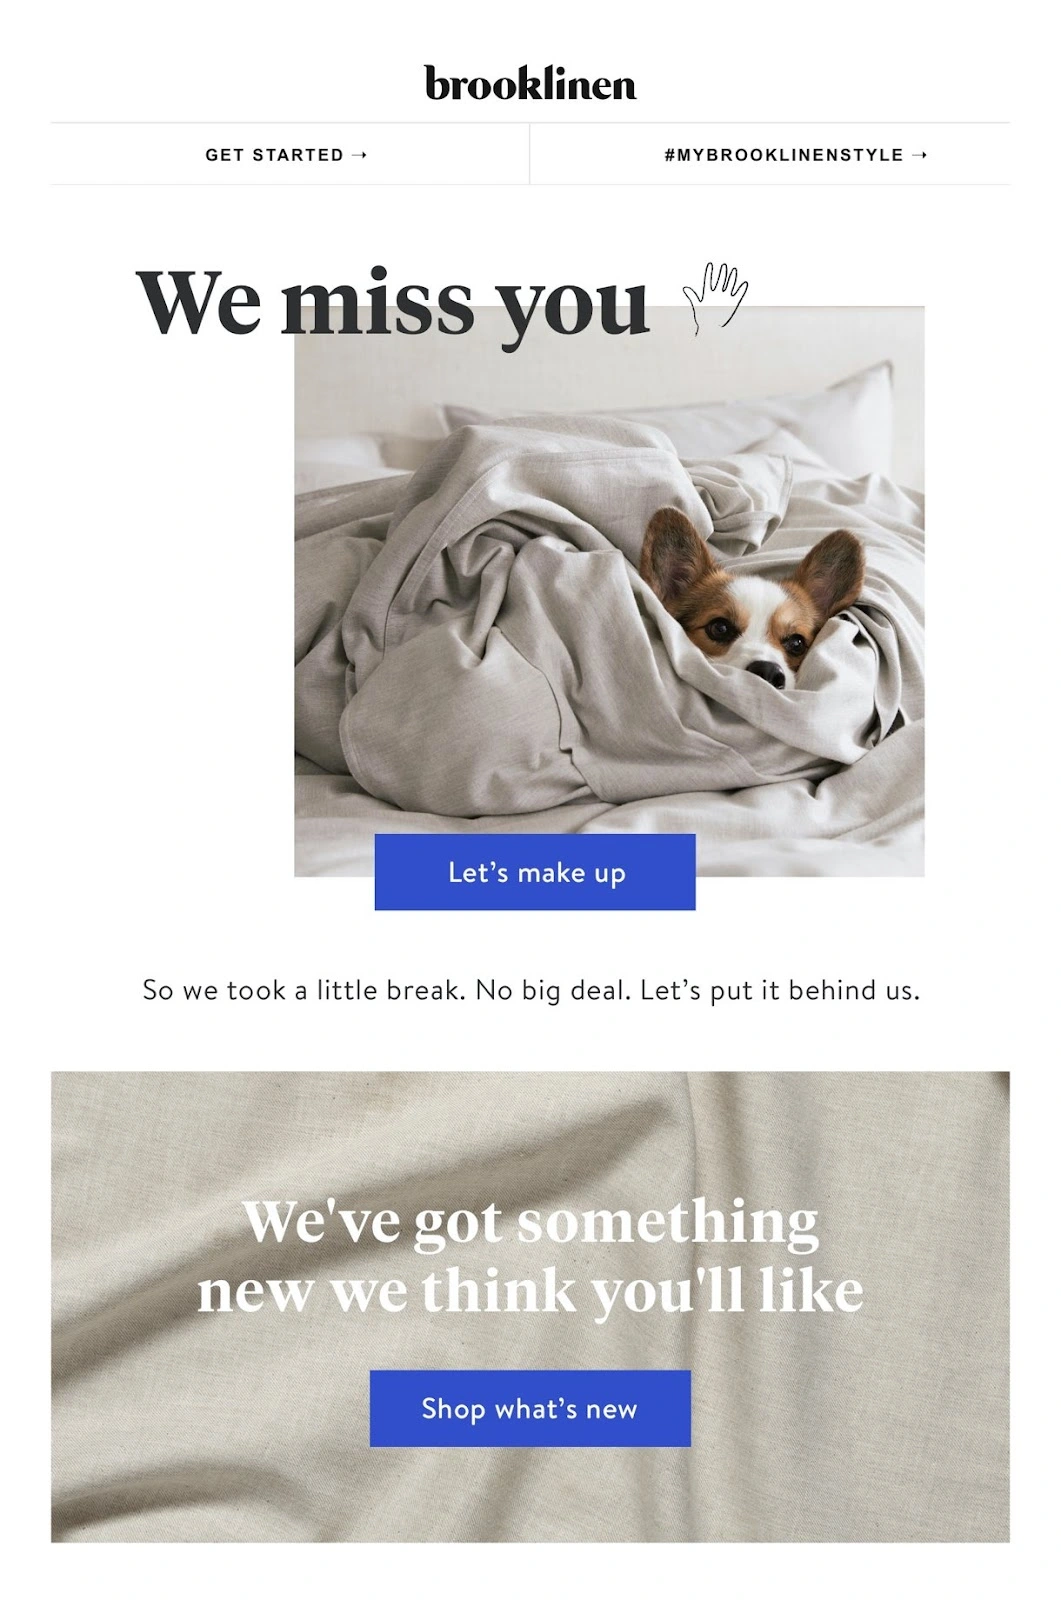 We Miss You" campaign by Brooklinen